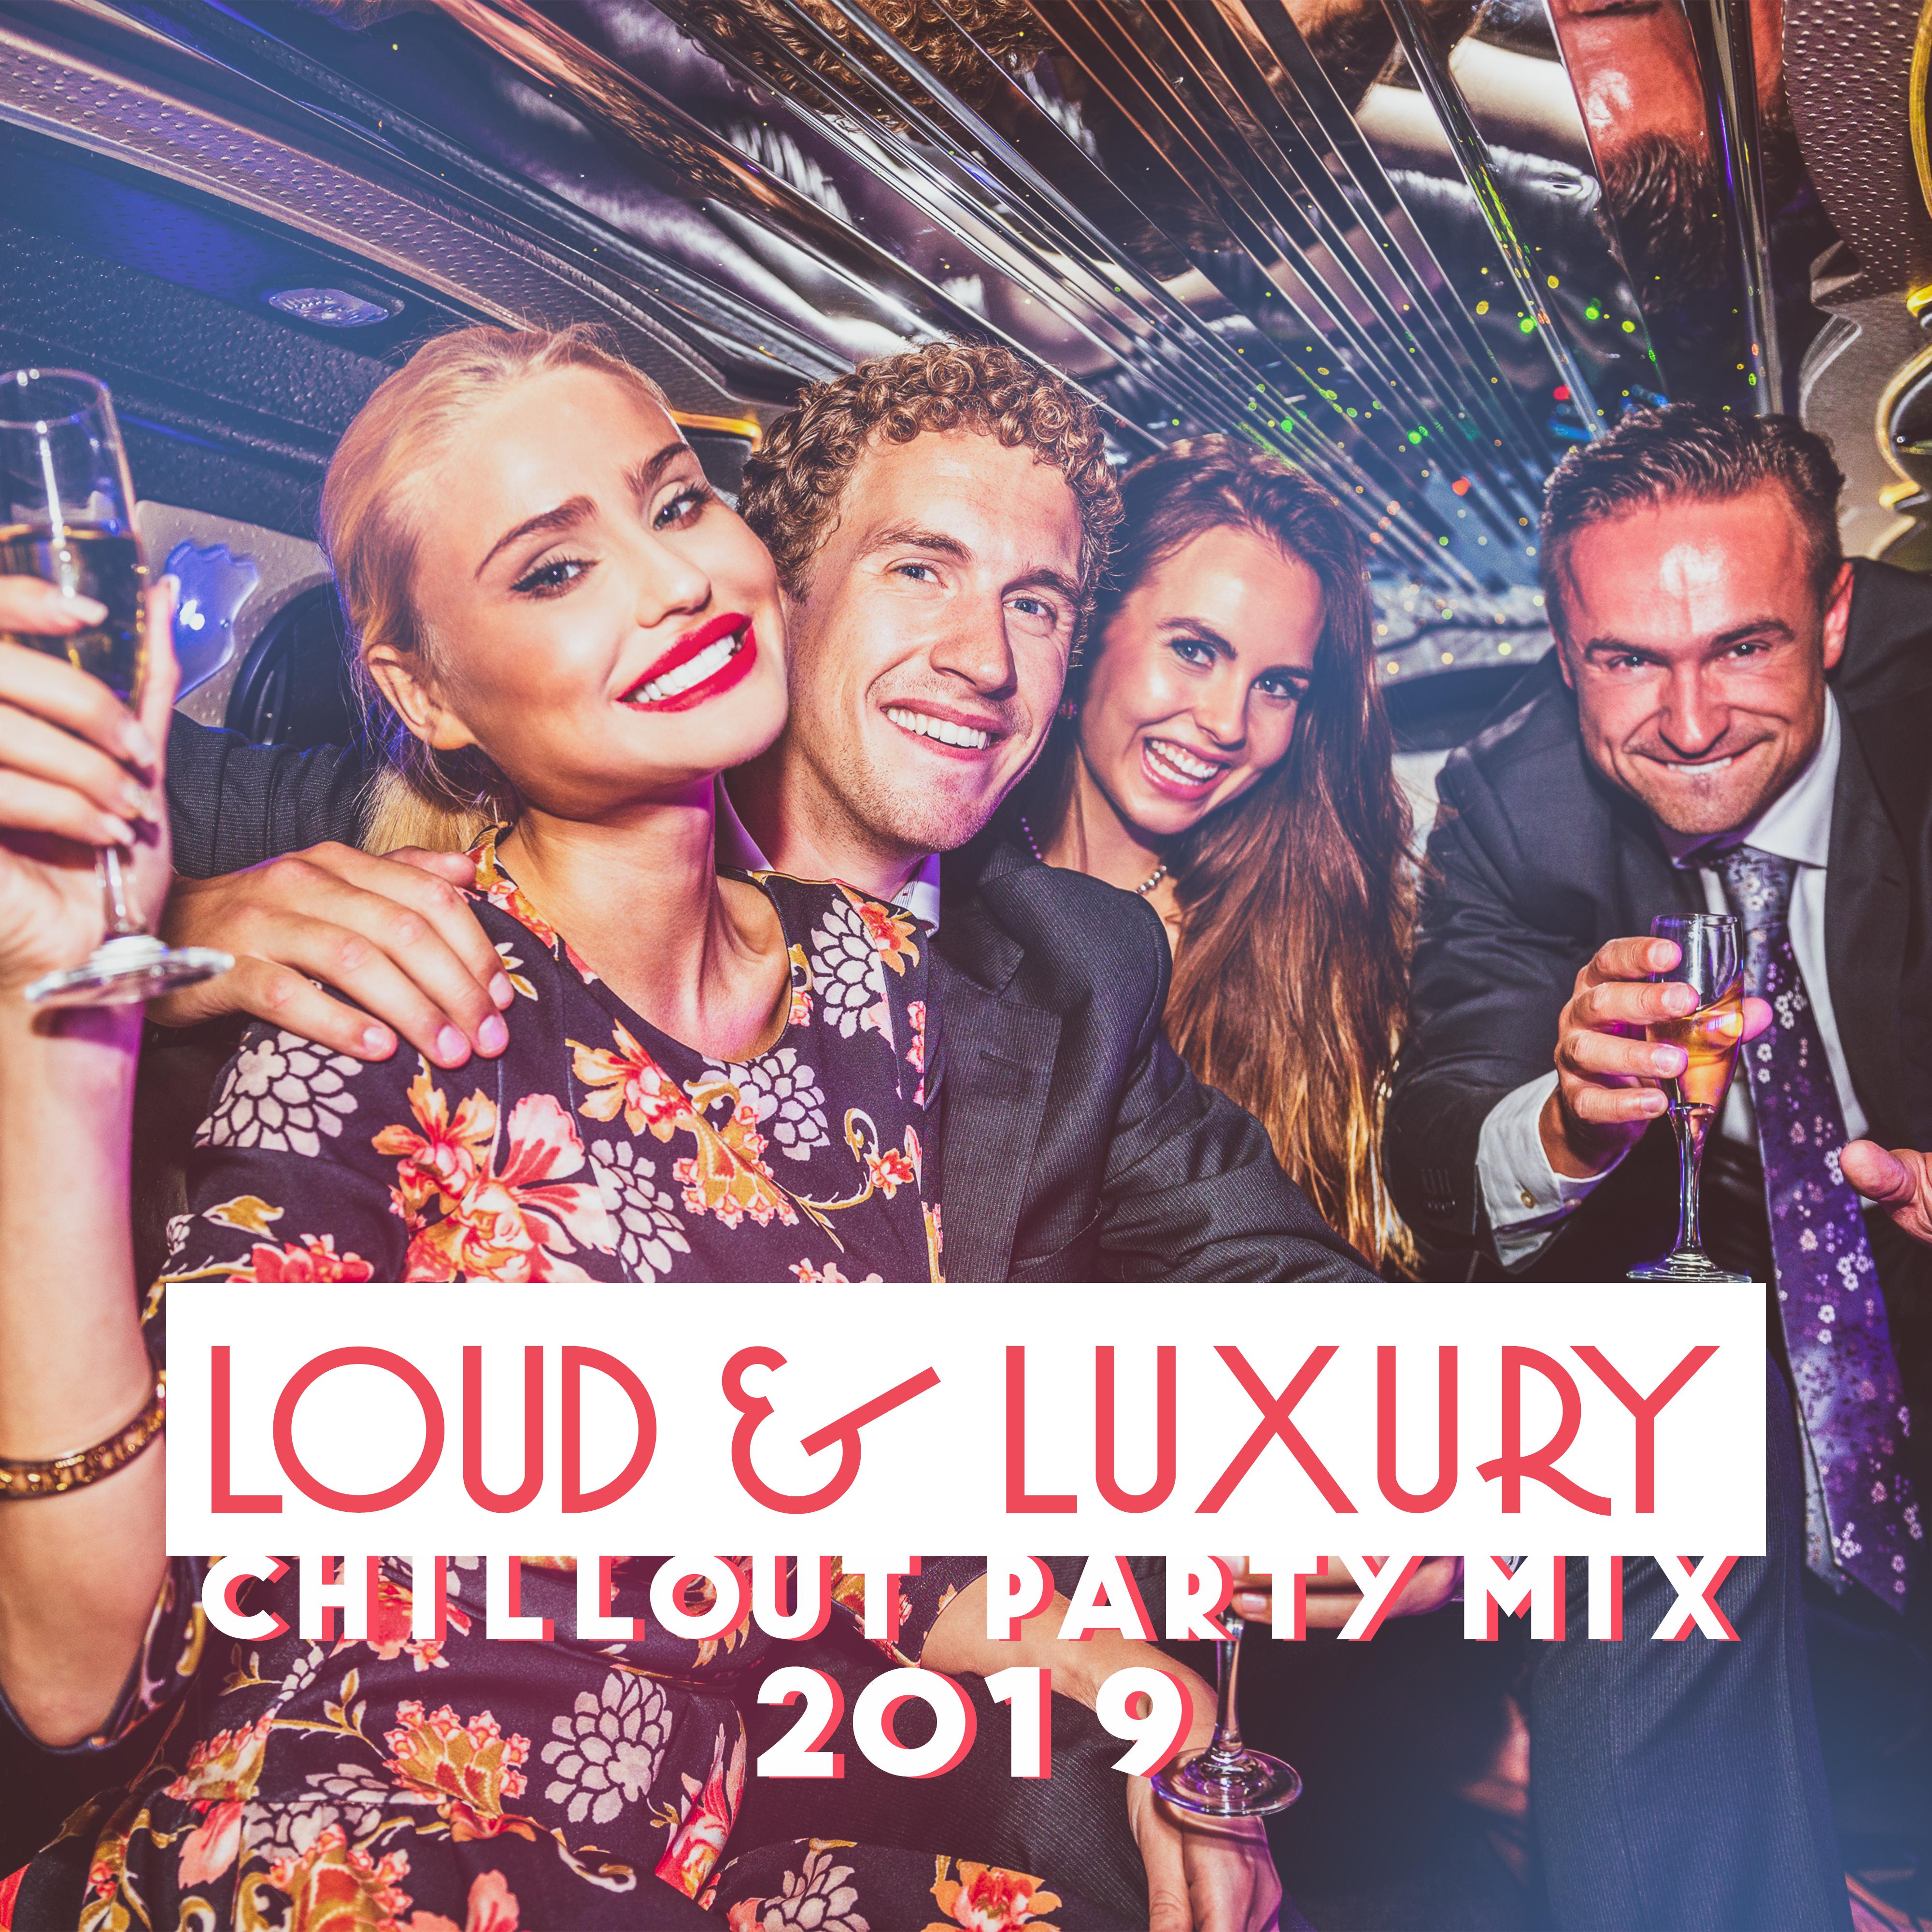 Loud  Luxury Chillout Party Mix 2019  Compilation of Best Electronic Chill Out Slow Music for Pool Party, Beach Party or Elegant Dance Party in the Mansion, Relaxing  Vibes, Chilled Paradise Lounge